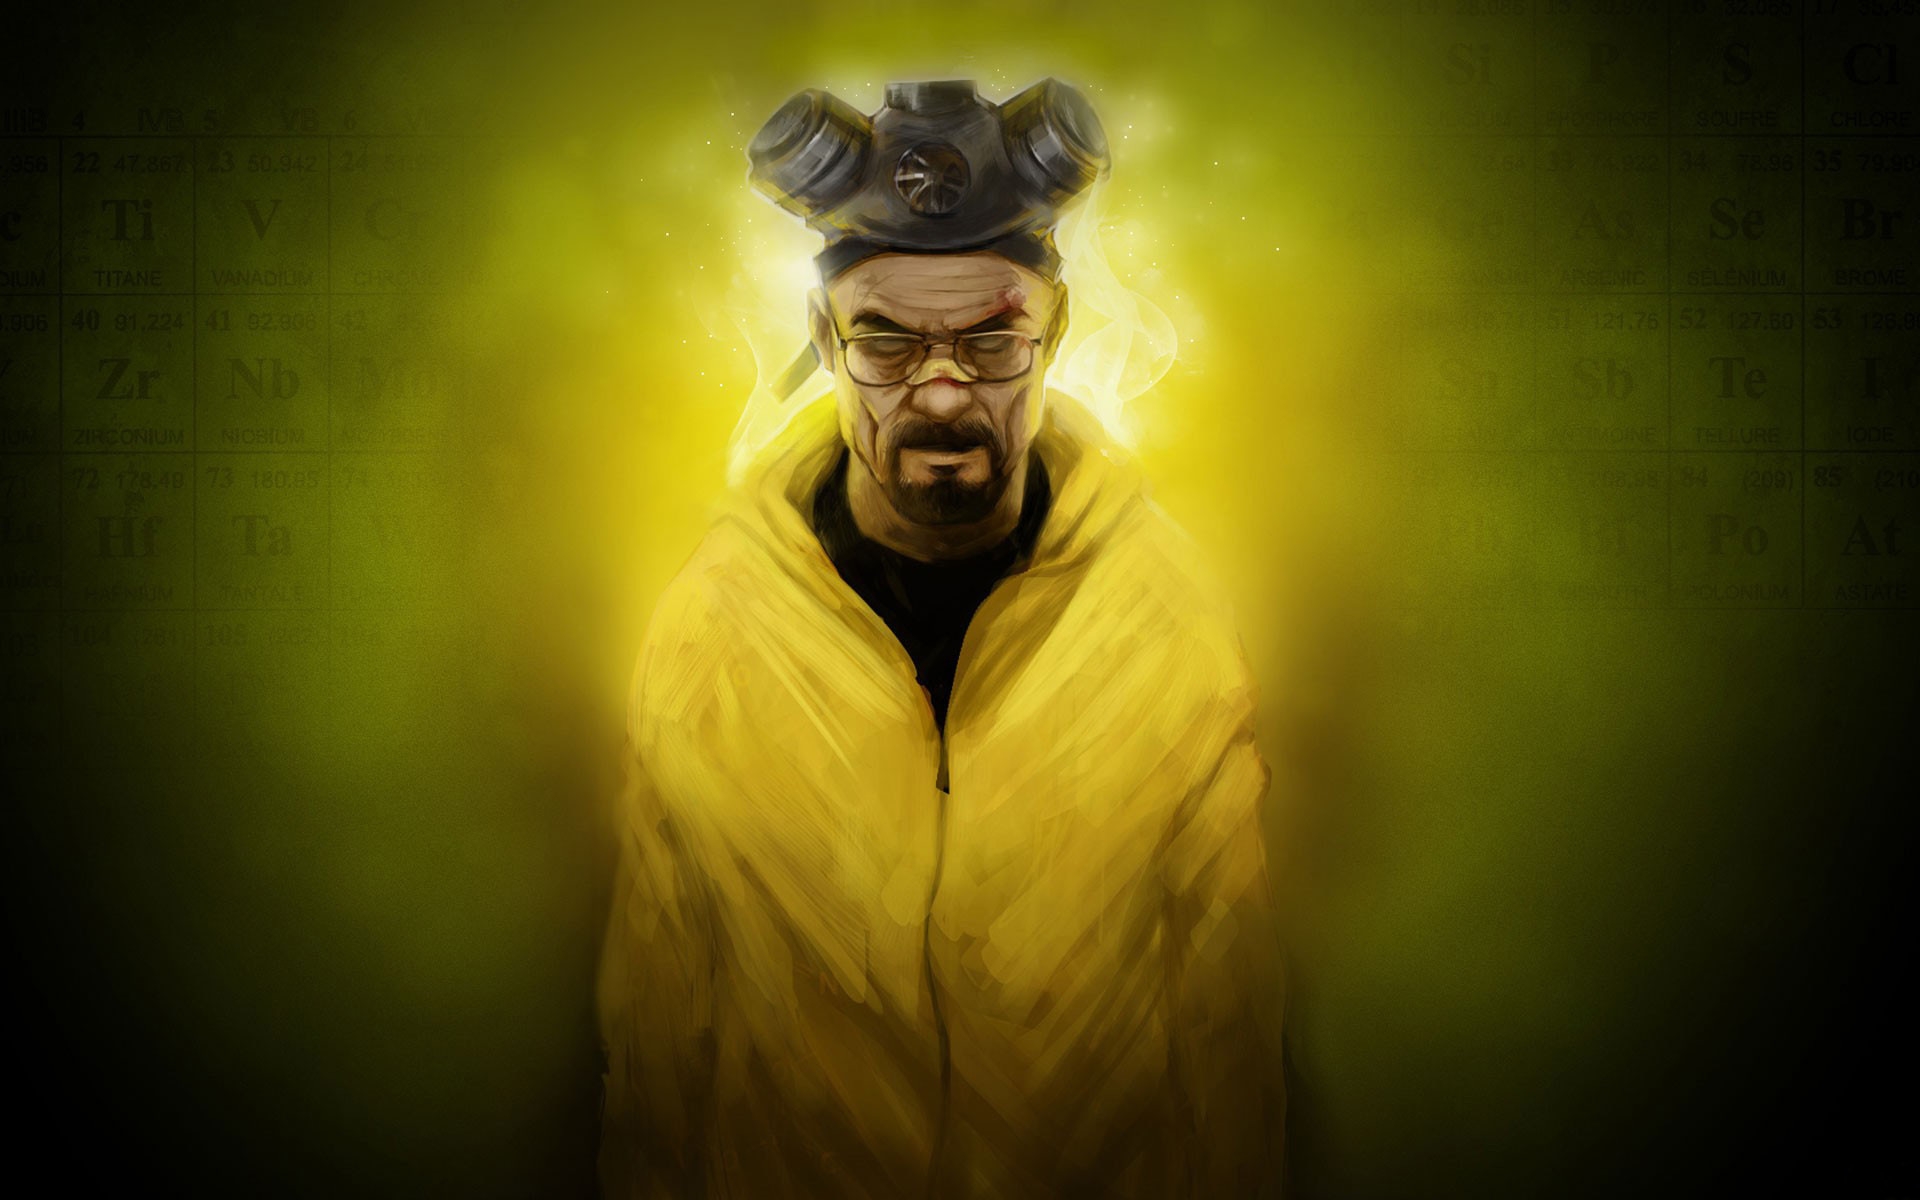 Amazing Breaking Bad Artwork for 1920 x 1200 widescreen resolution